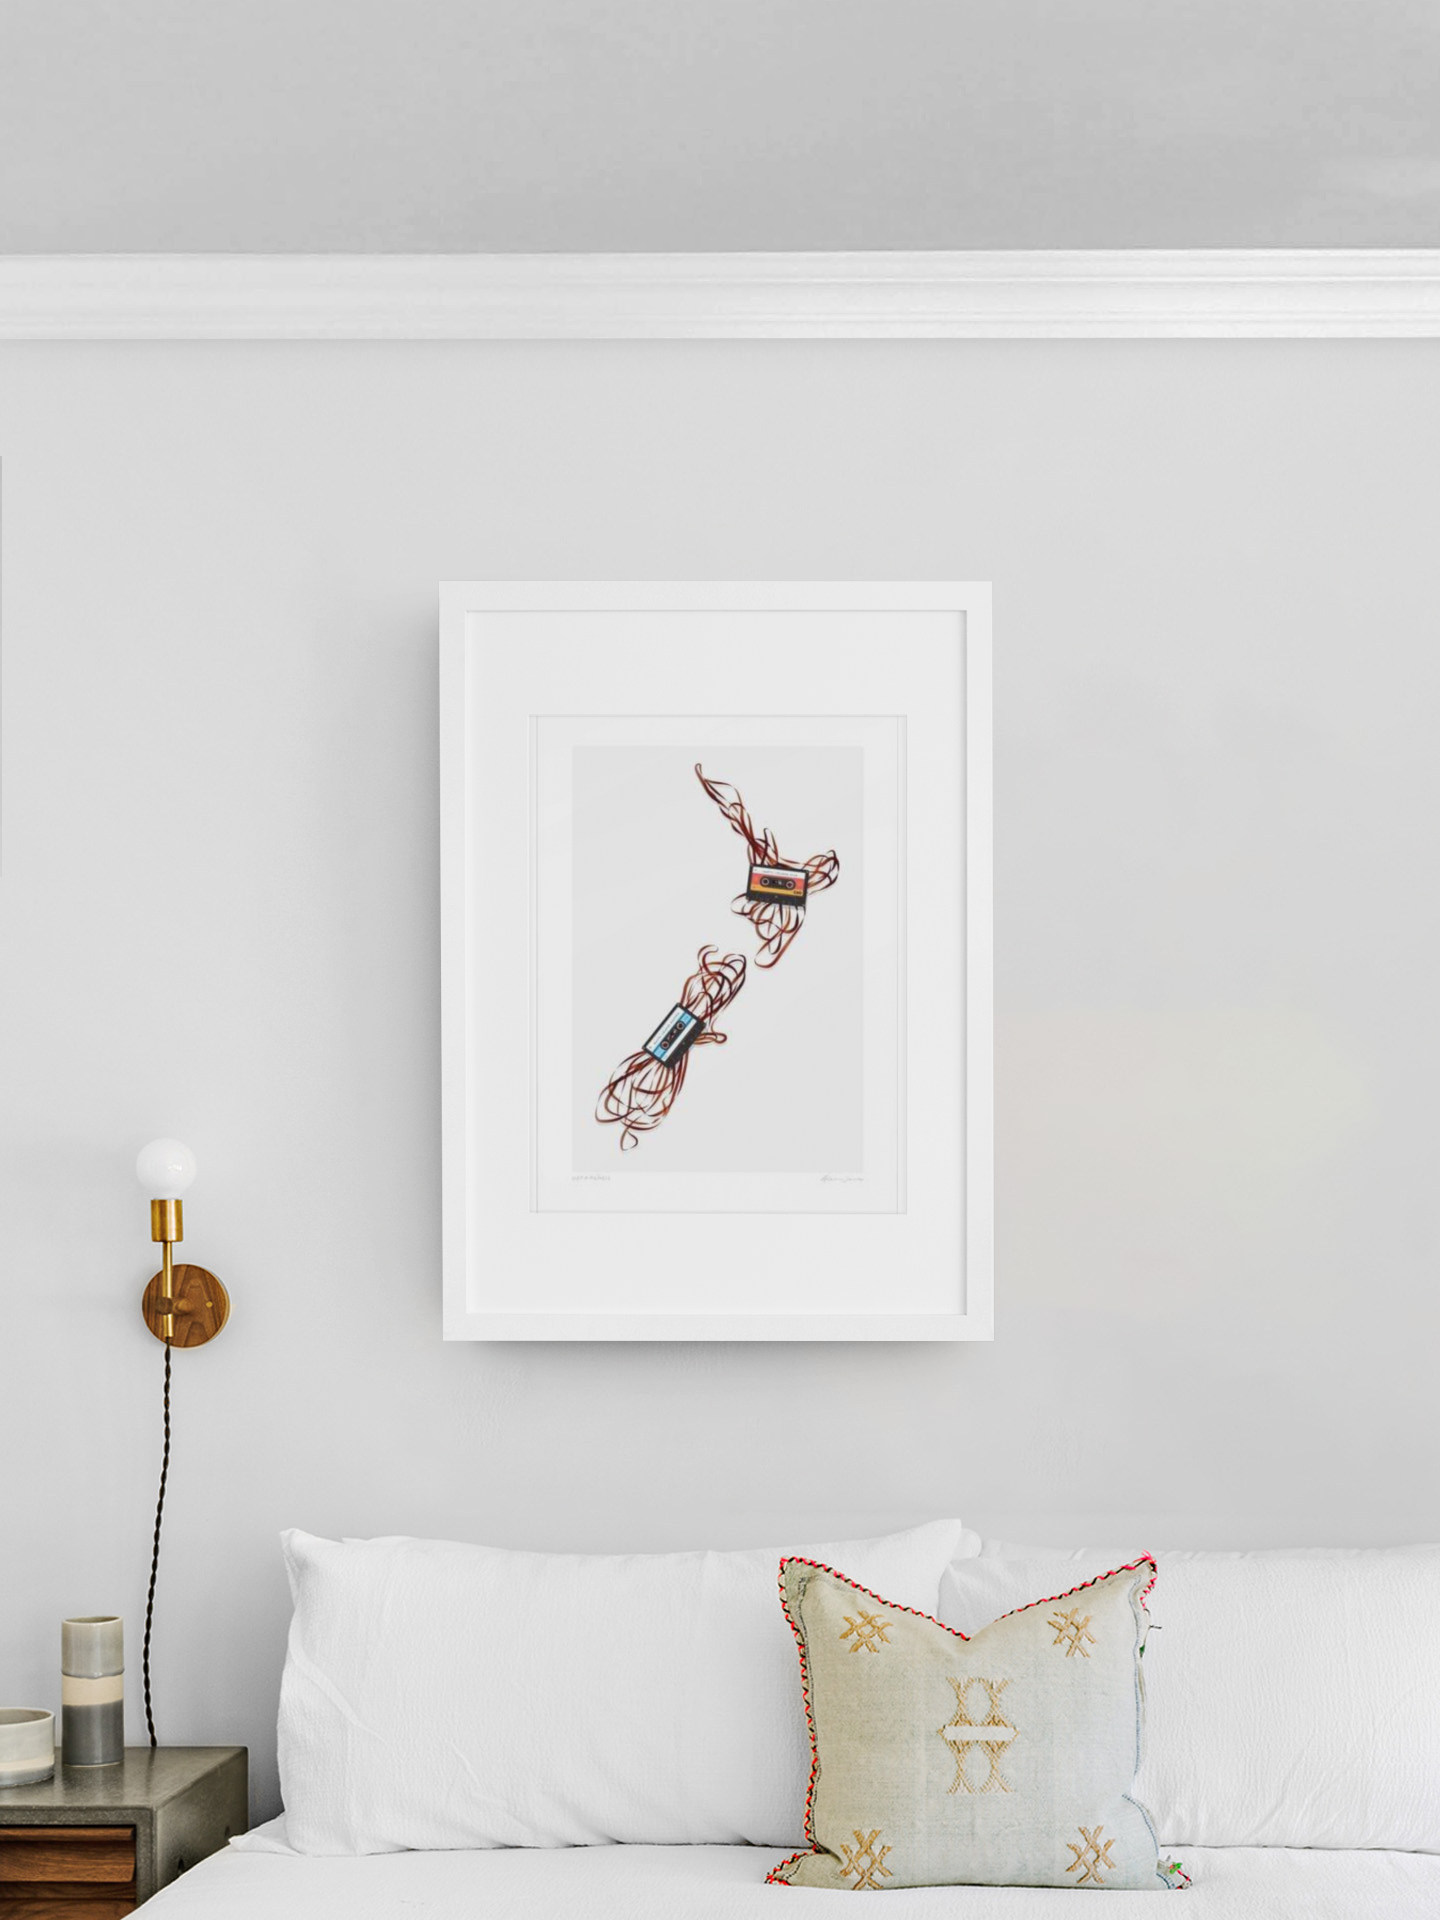 Modern art piece featuring Get a Pencil by Glenn Jones, an abstract, linear design in red against a white backdrop, elegantly framed and displayed on a clean, white wall above a cozy bed with plush pillows, illustrating the vibes of old.